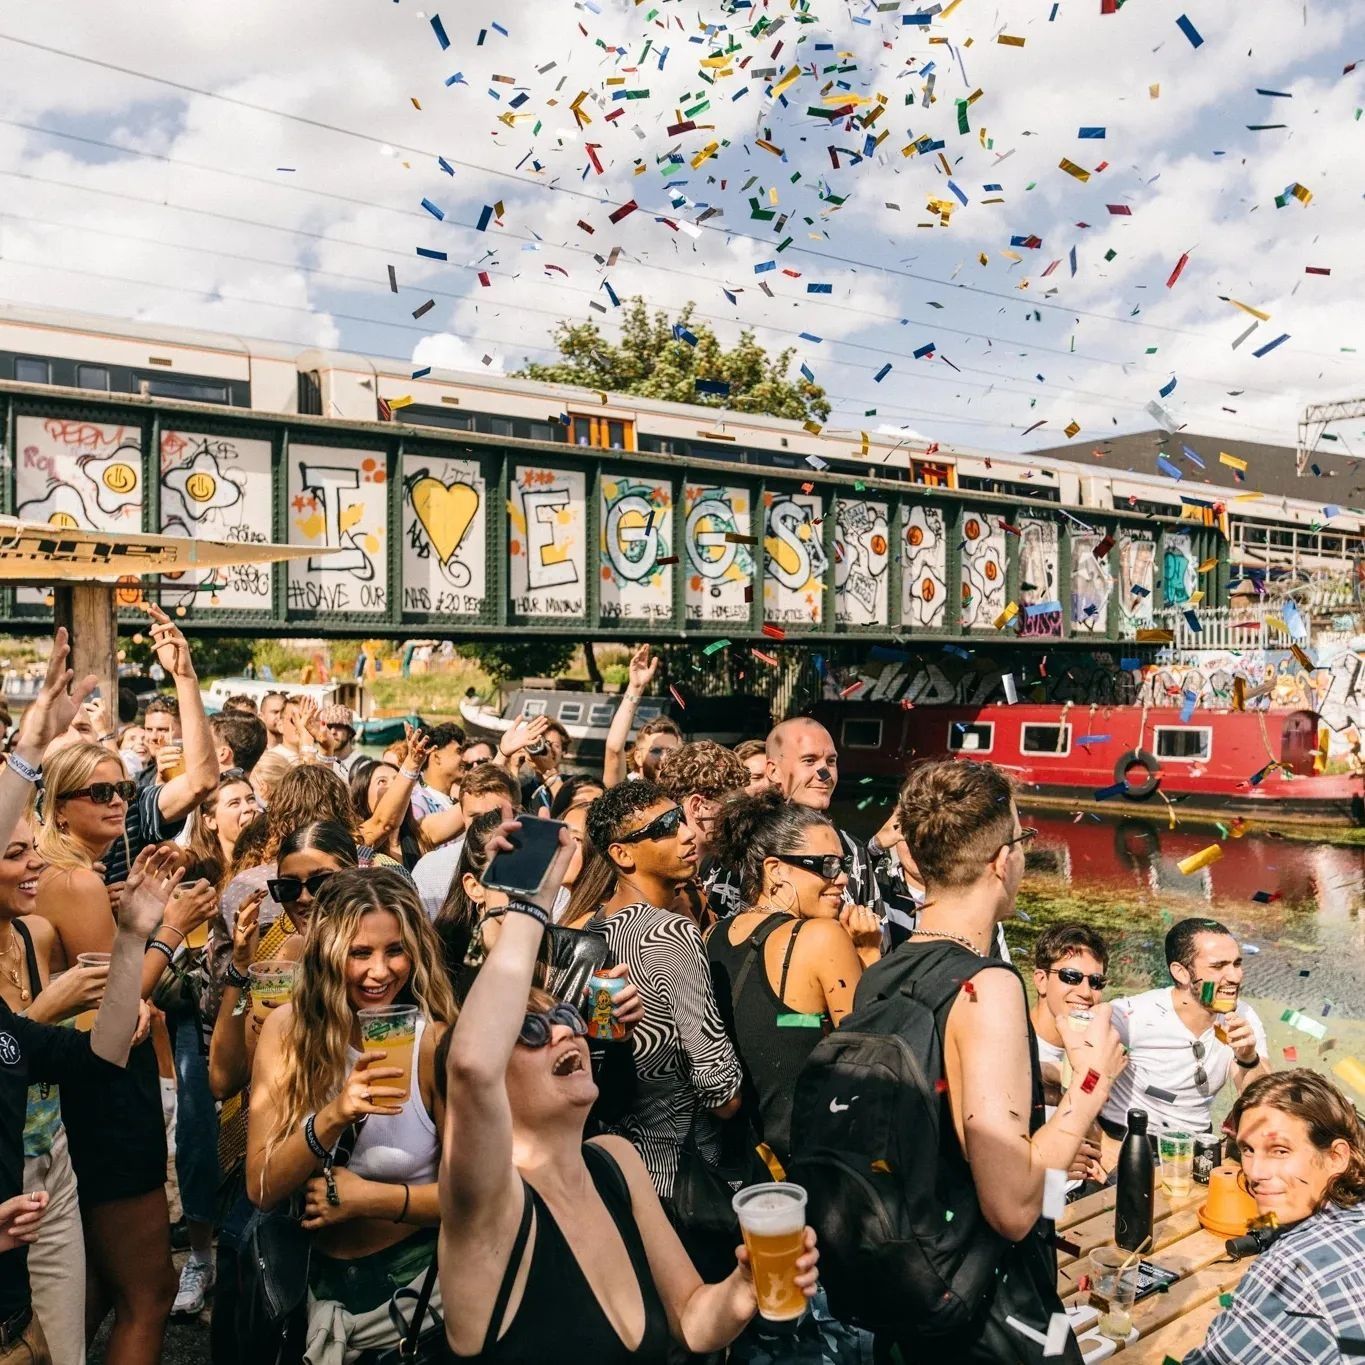 Hire Things to do in London for the May bank holiday weekends venues